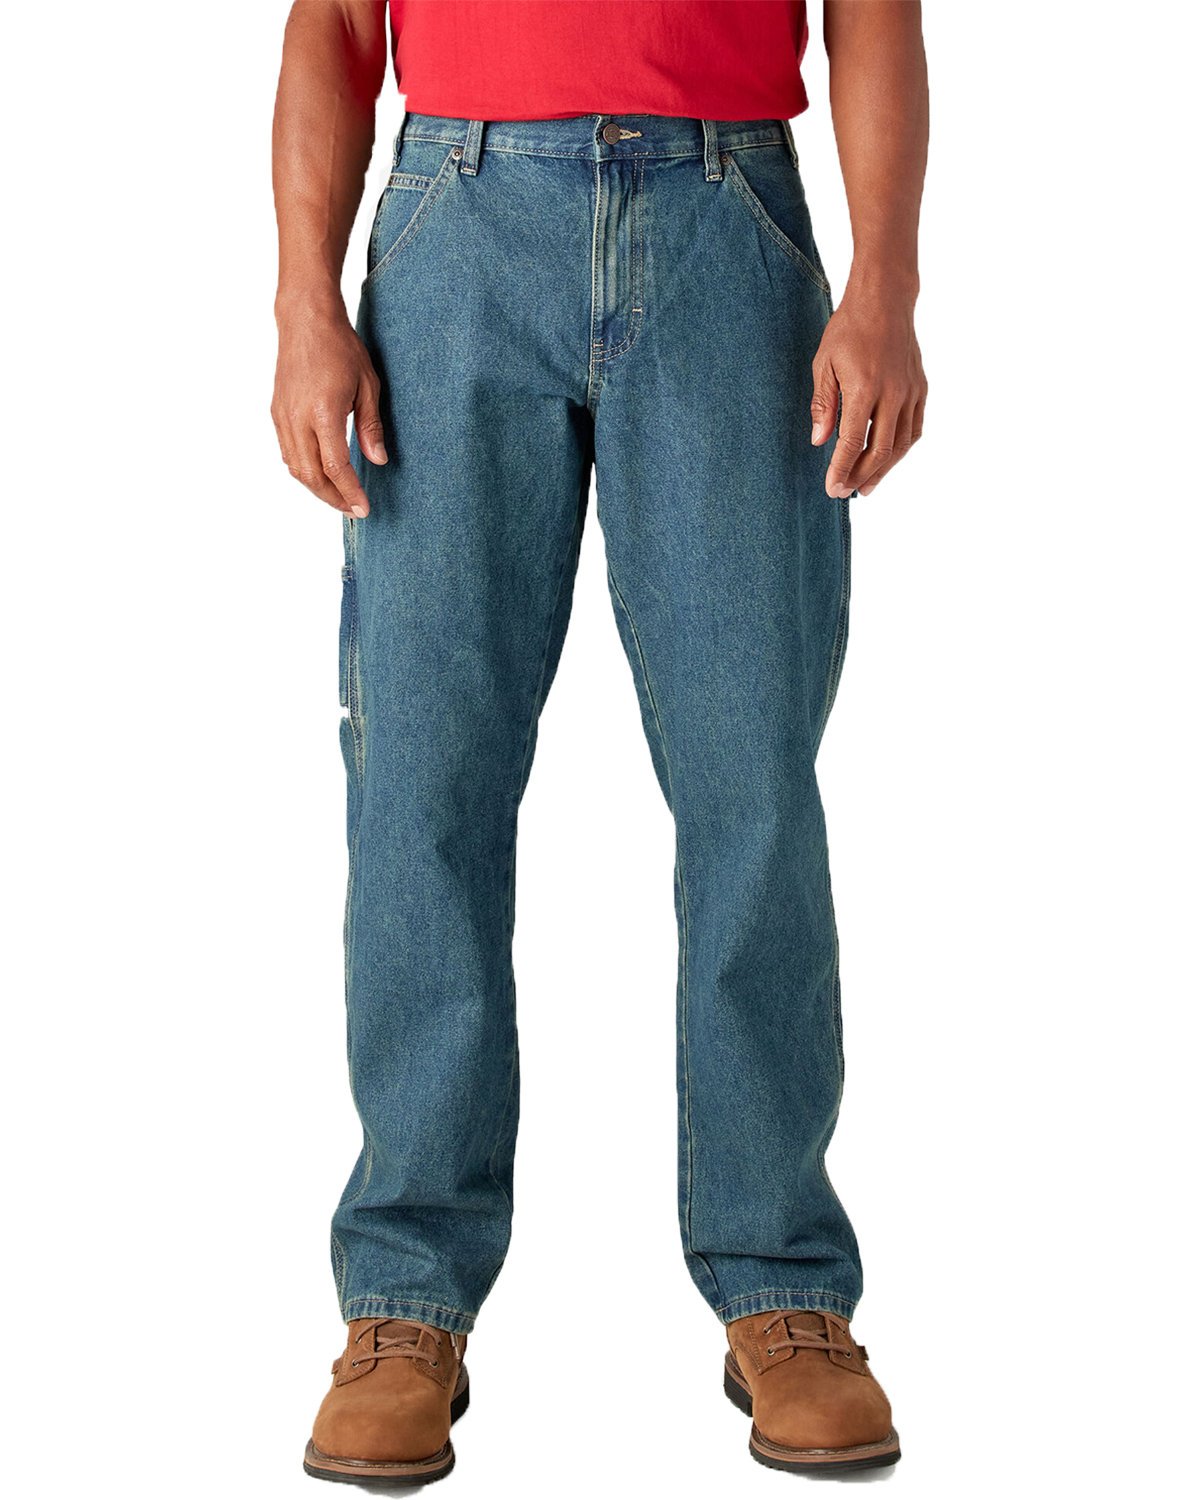 Front view of Unisex Relaxed Fit Stonewashed Carpenter Denim Jean Pant